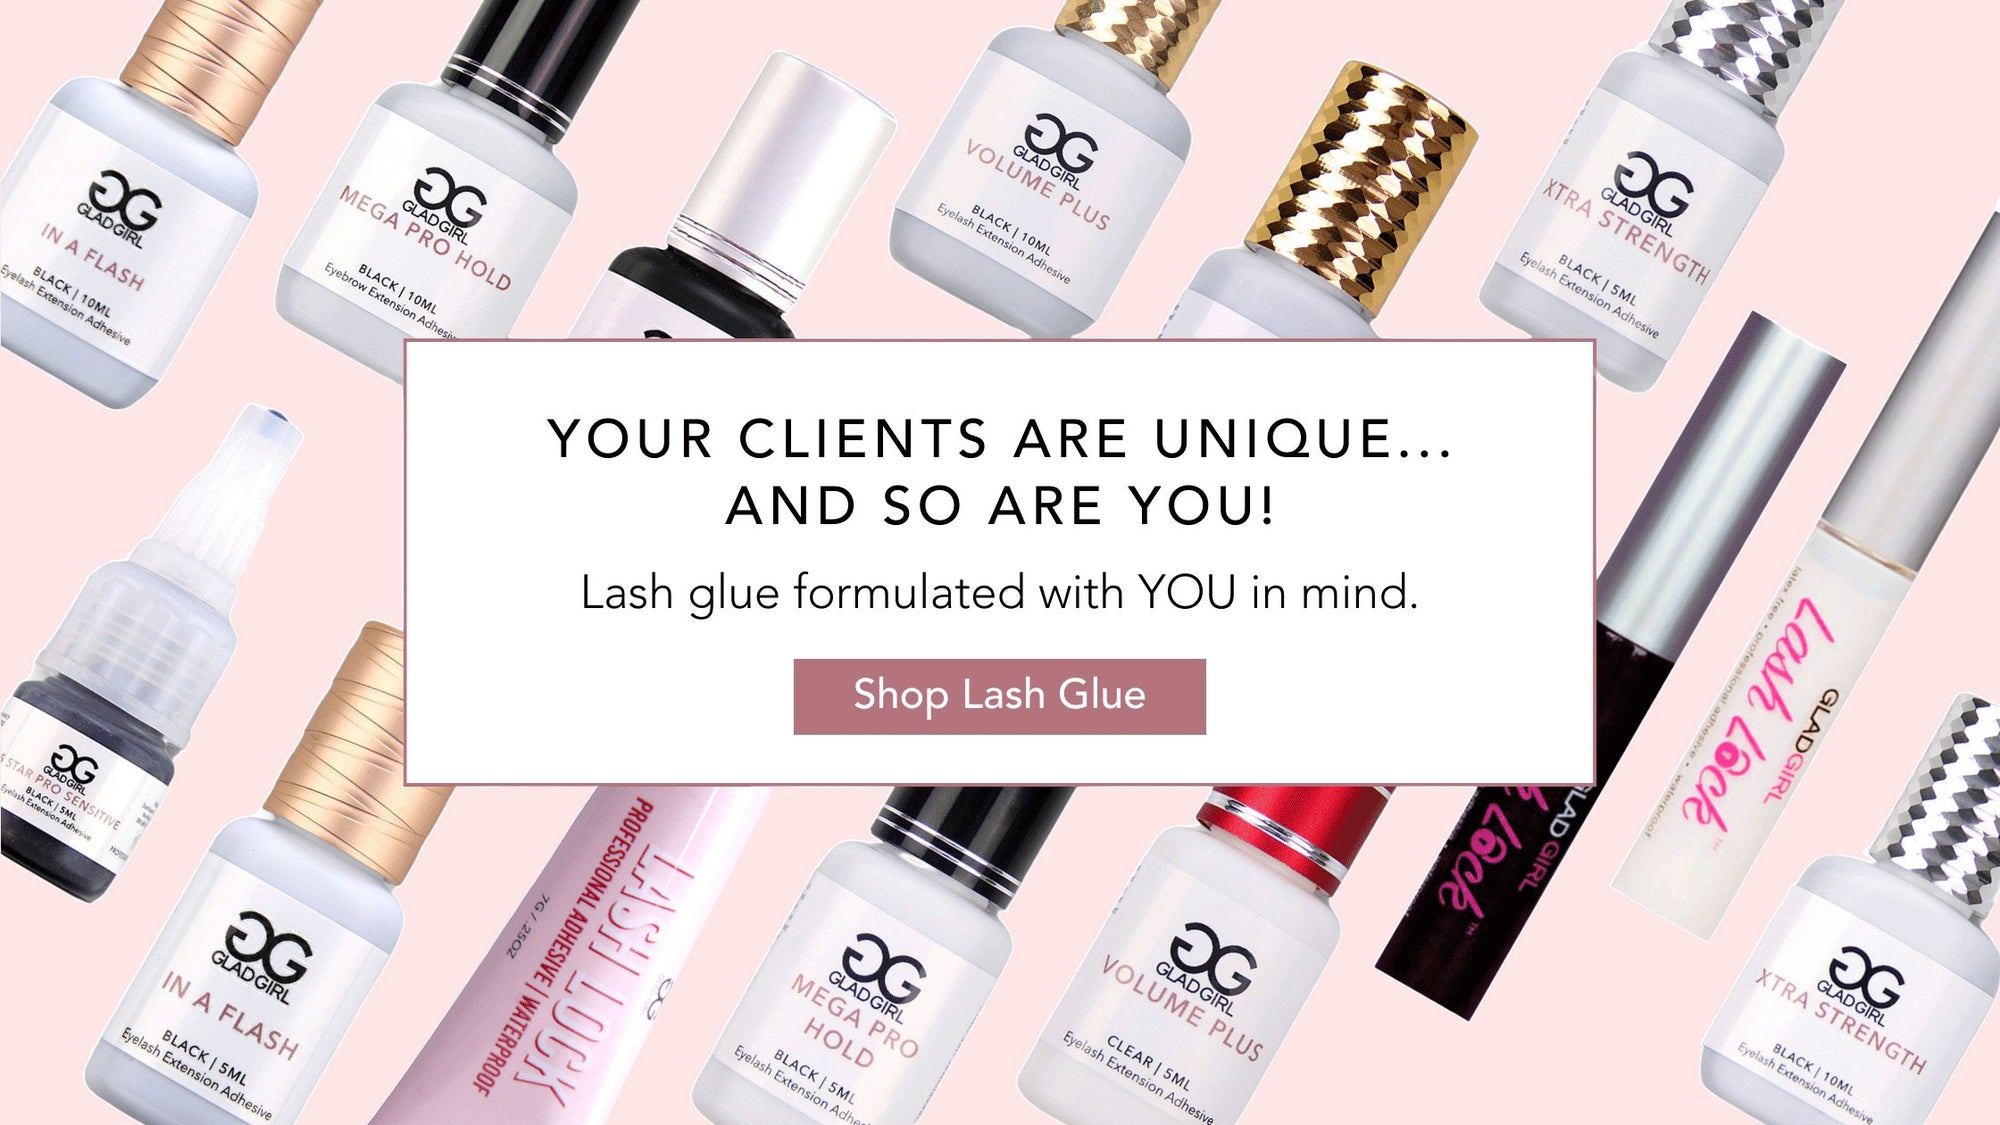 Your clients are unique...and so are you! Lash glue formulated with YOU in mind. Shop Lash Glue